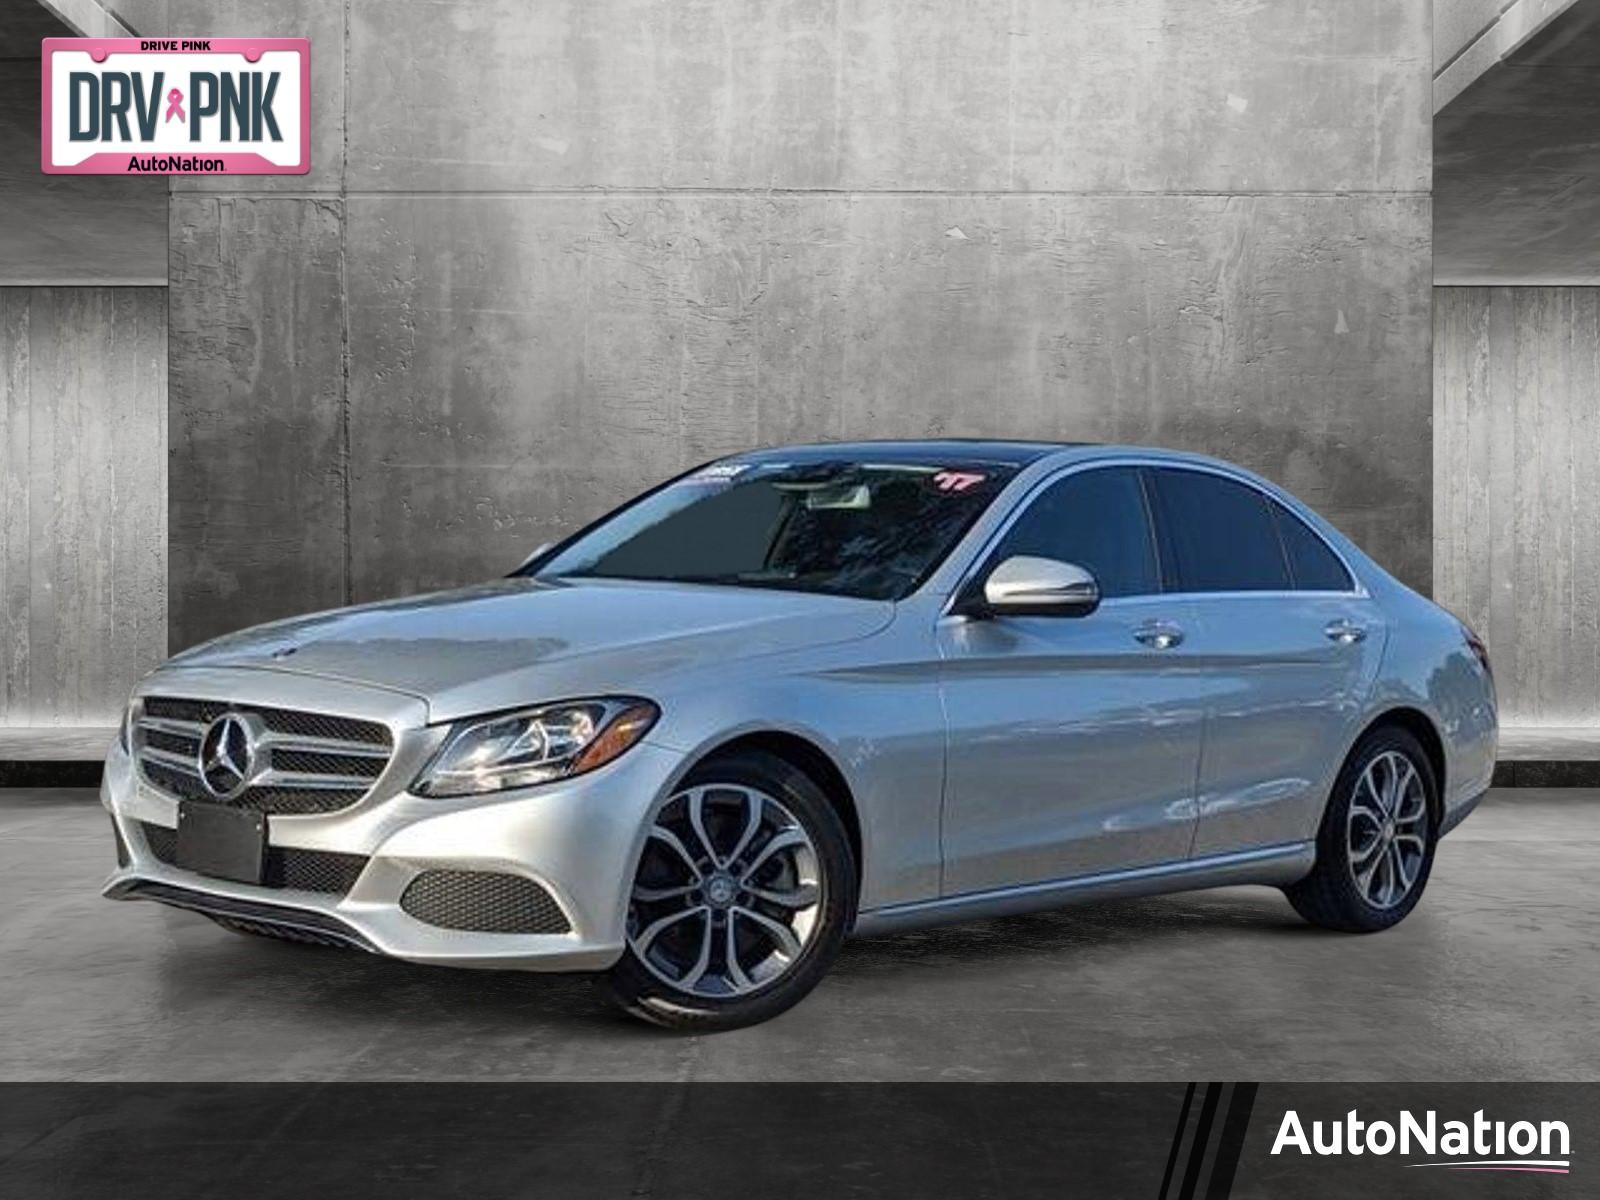 2017 Mercedes-Benz C-Class Vehicle Photo in Clearwater, FL 33764